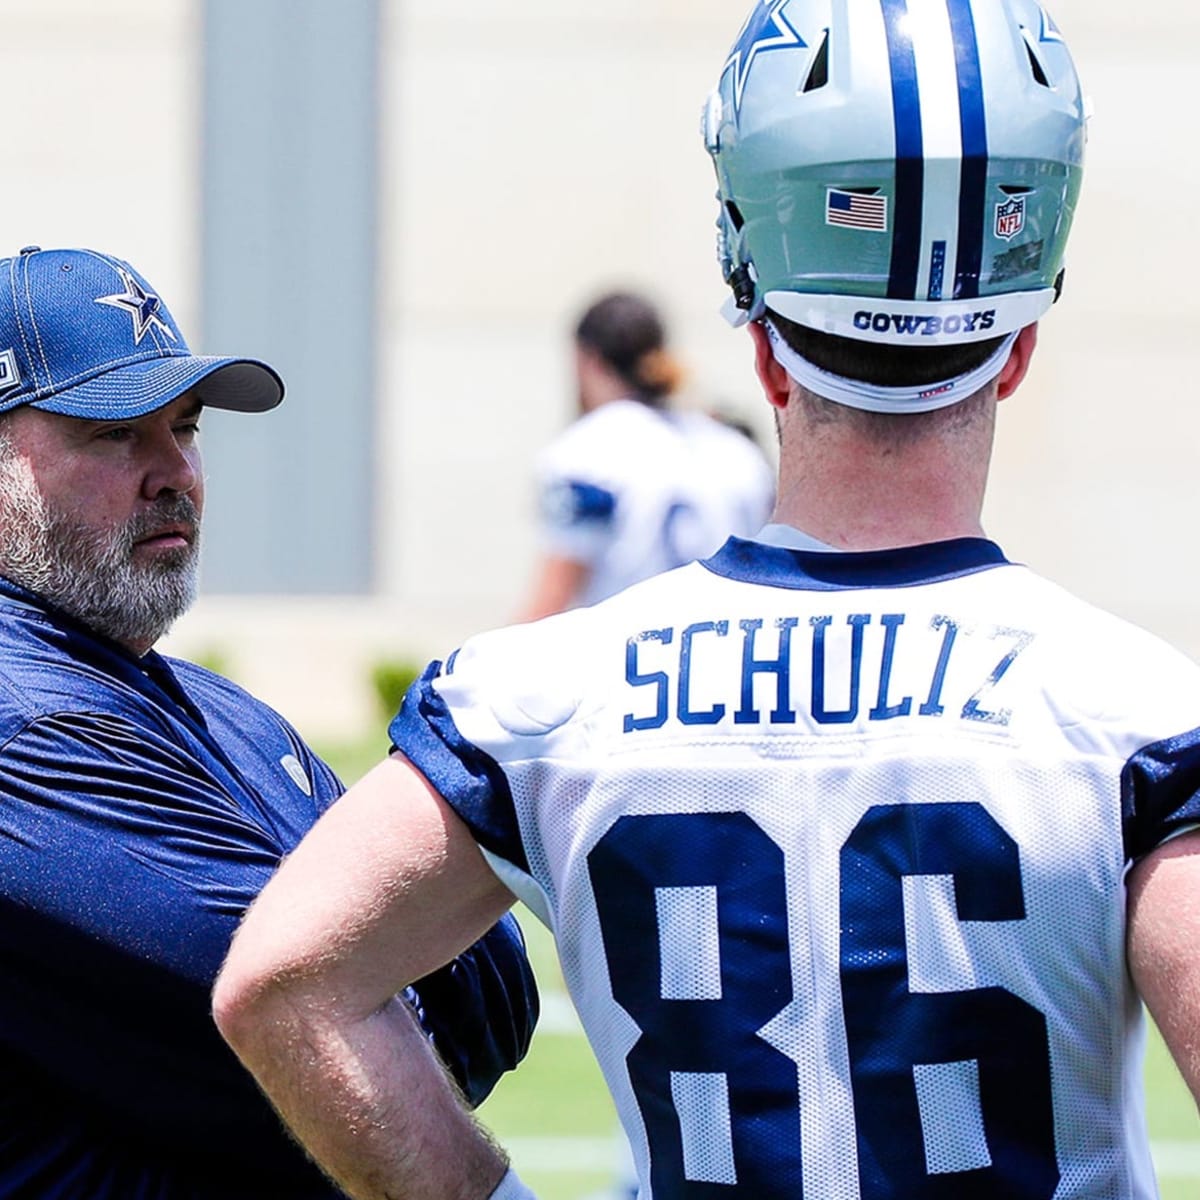 Dalton Schultz rejected Cowboys 3 year 36M contract offer